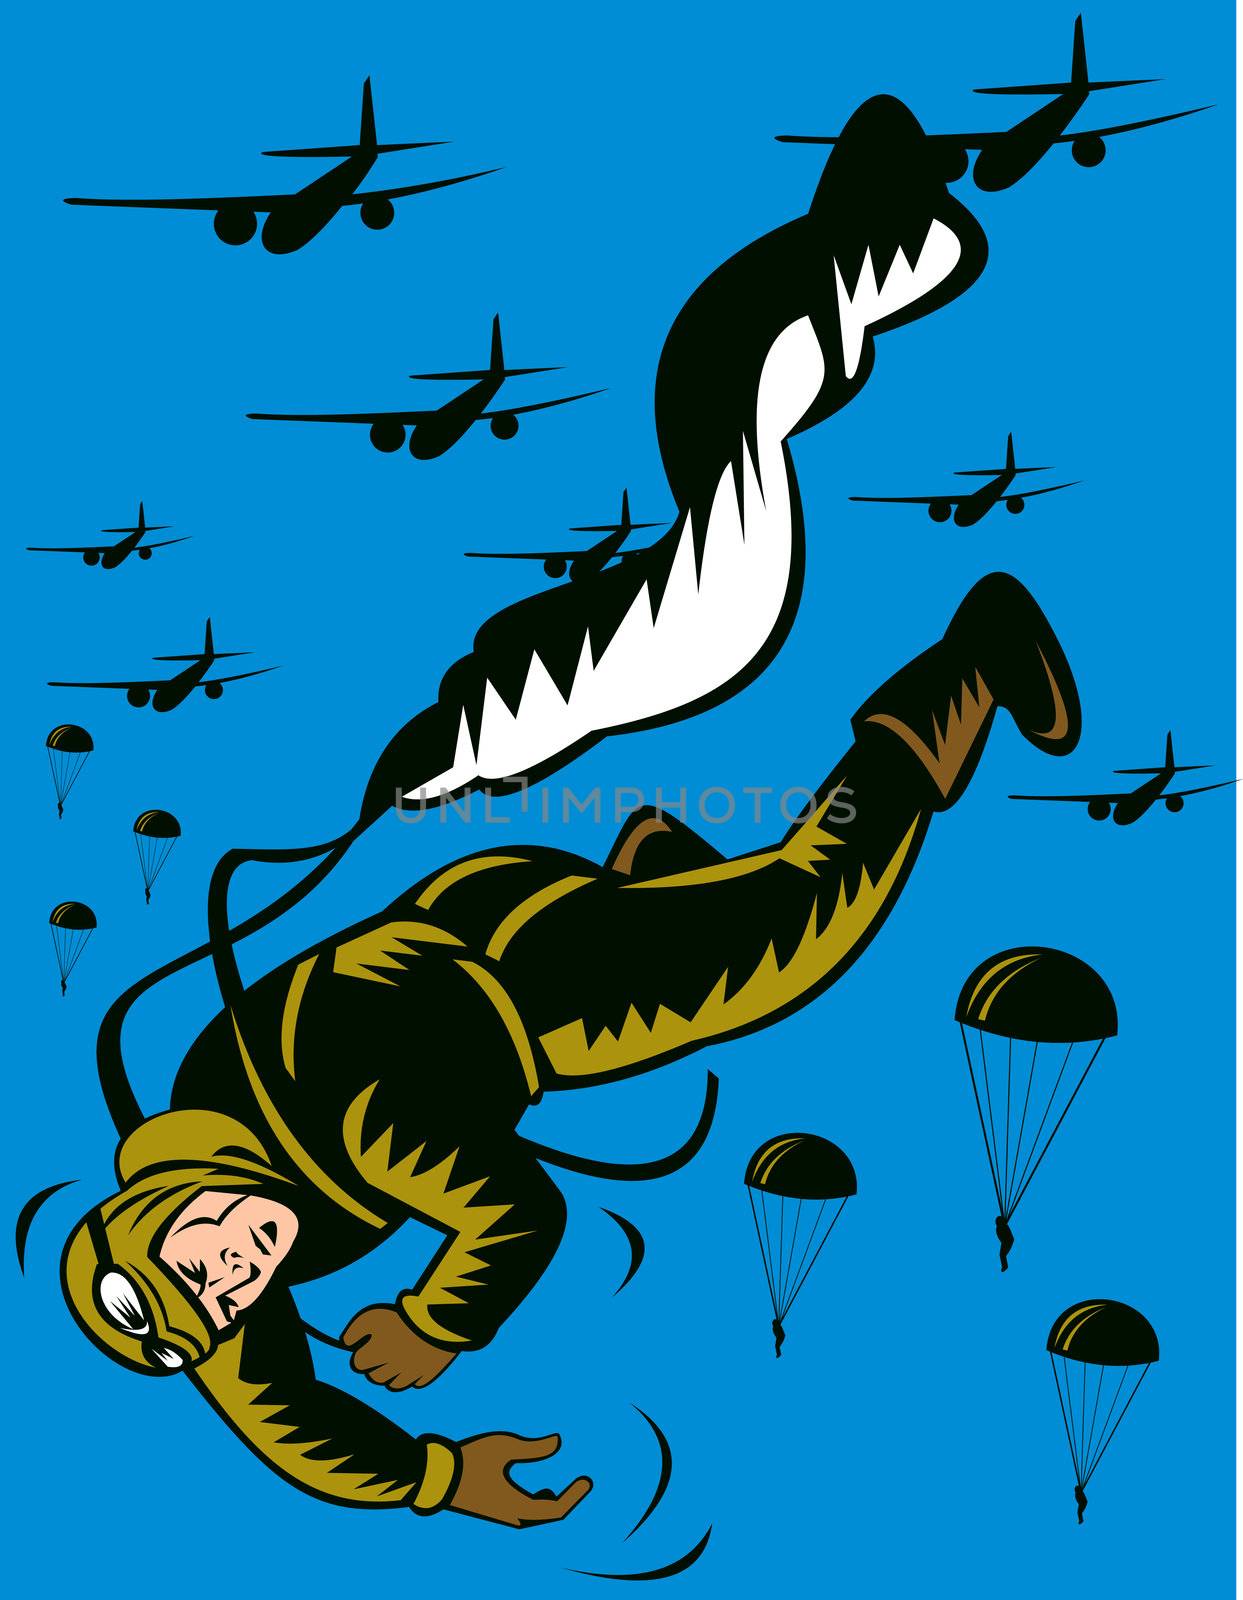 World war two soldier parachuting pulling cord by patrimonio